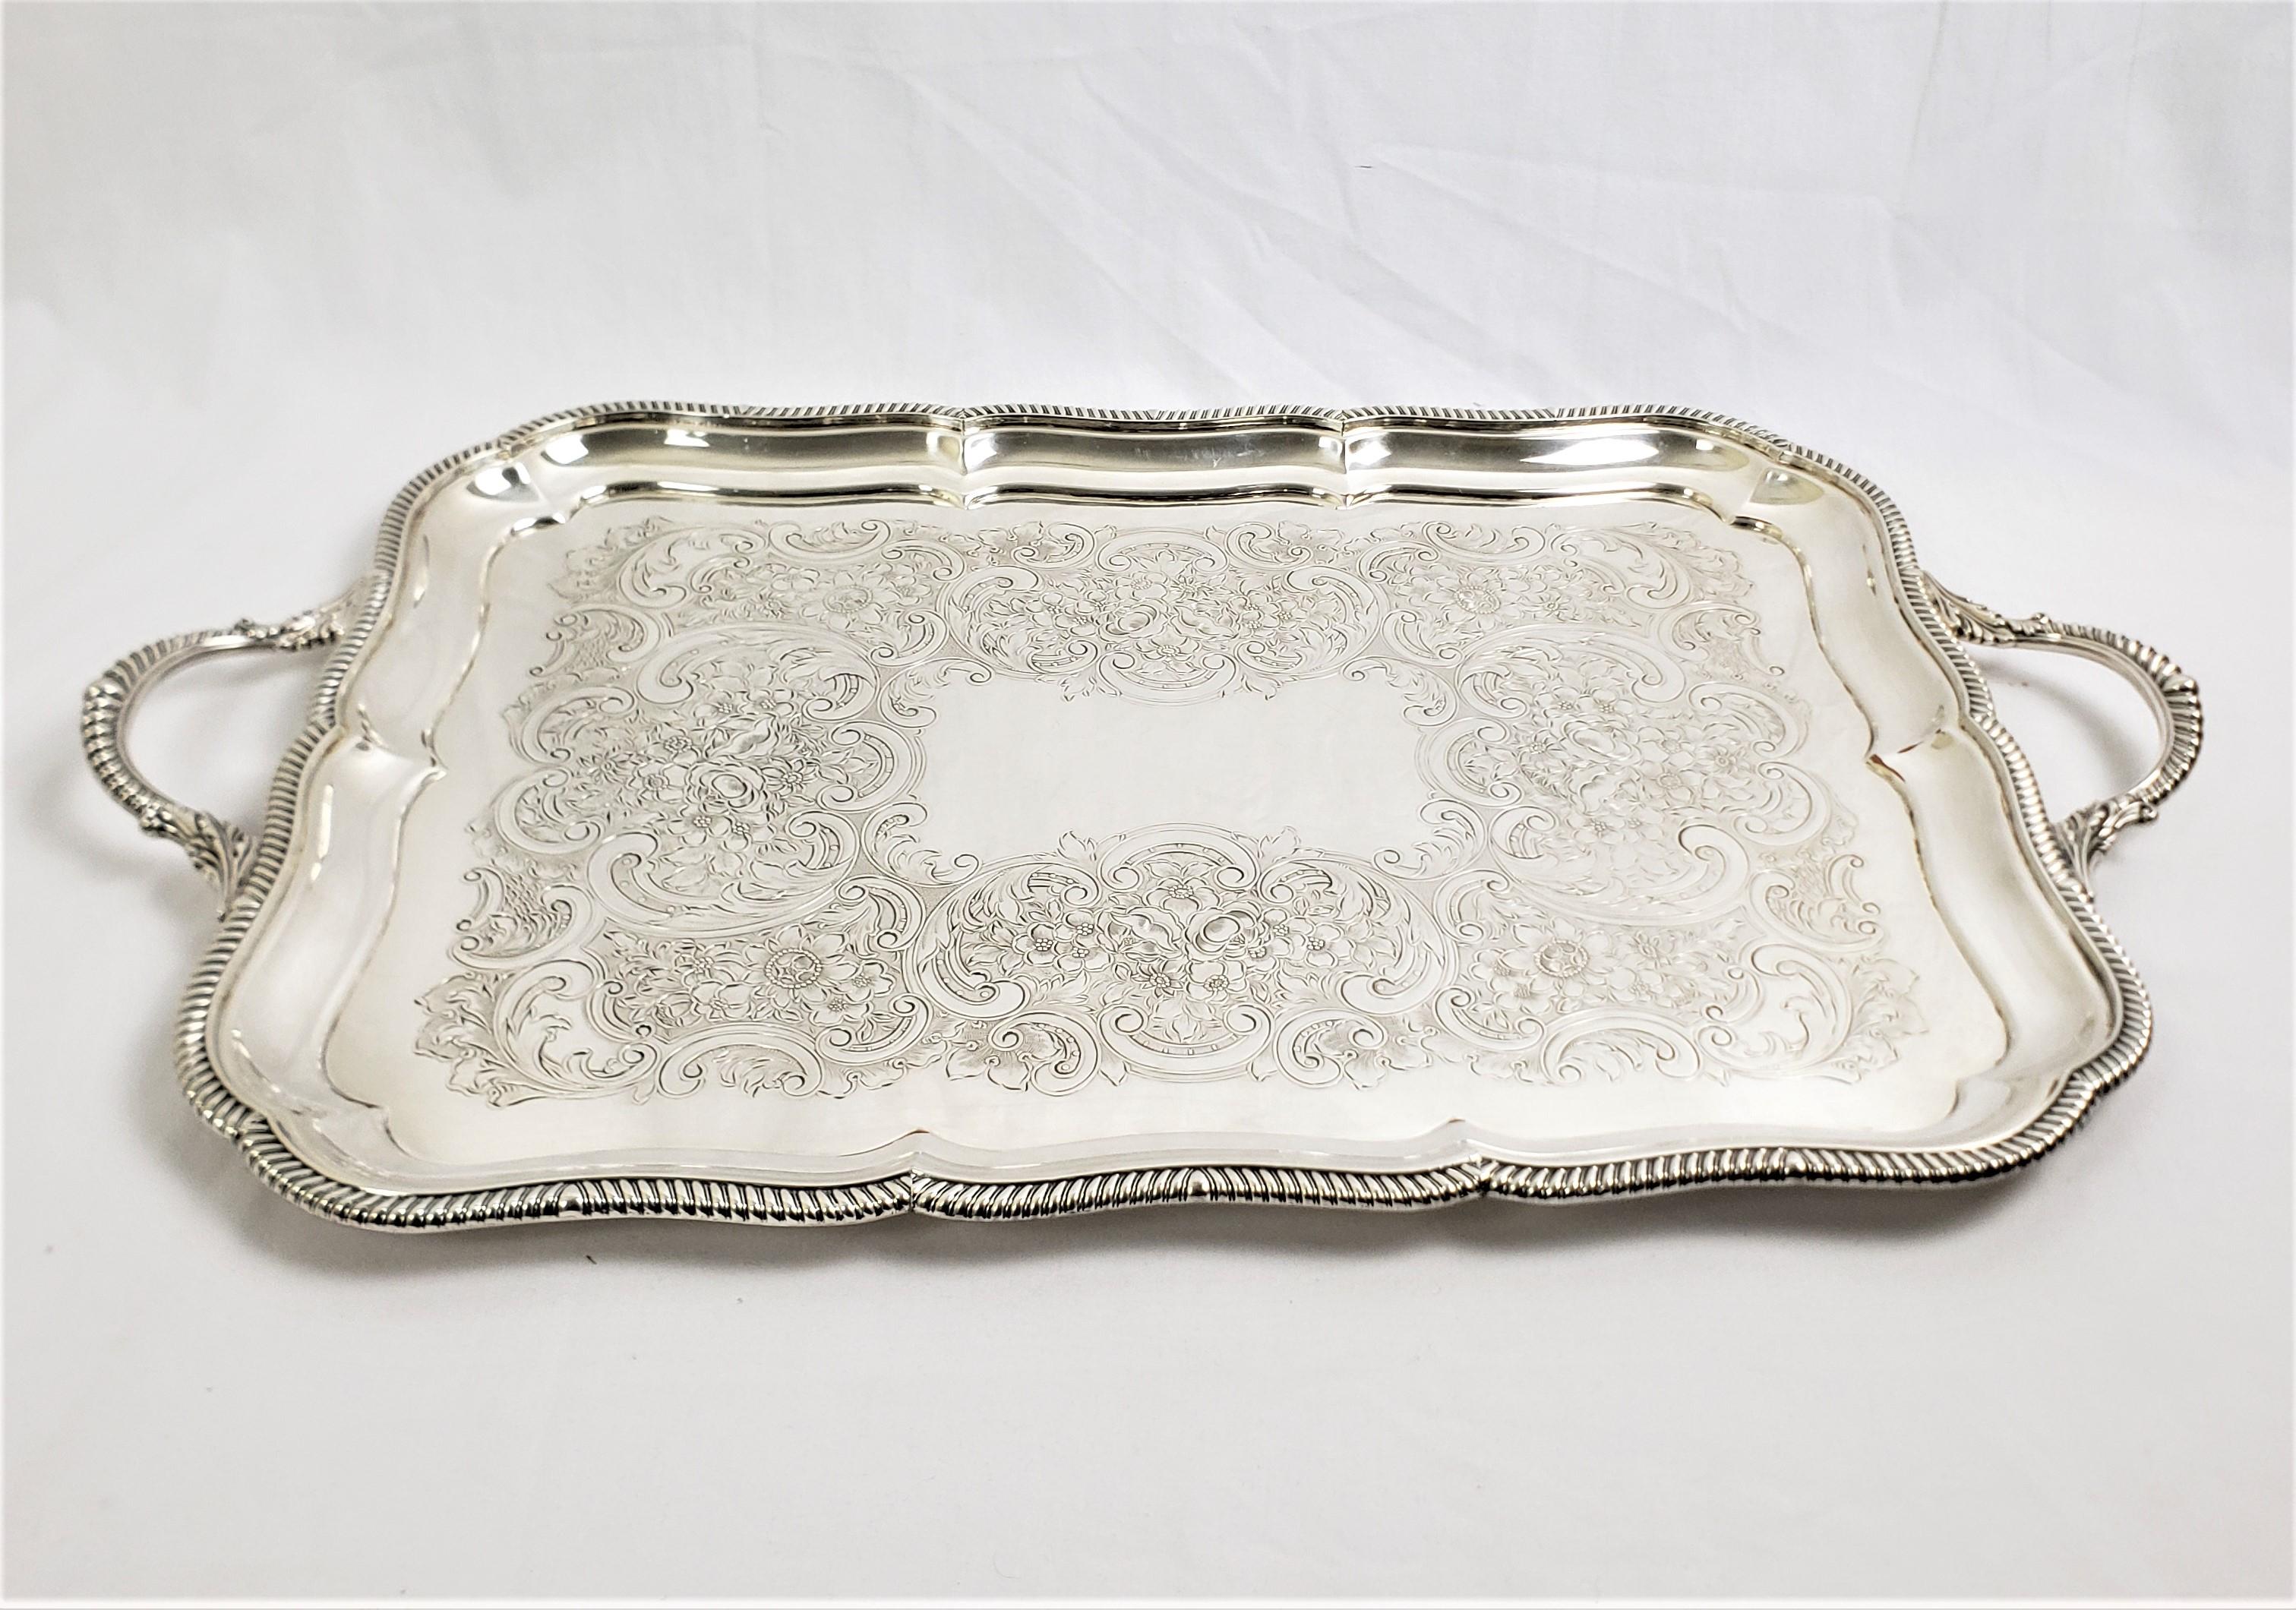 This antique rectangular silver plated serving tray was made by the well known Barker Ellis Silver Co. of England in approximately 1920 in a period Art Deco style. The tray is done with a stylized rope surround, which is accented on the handles with